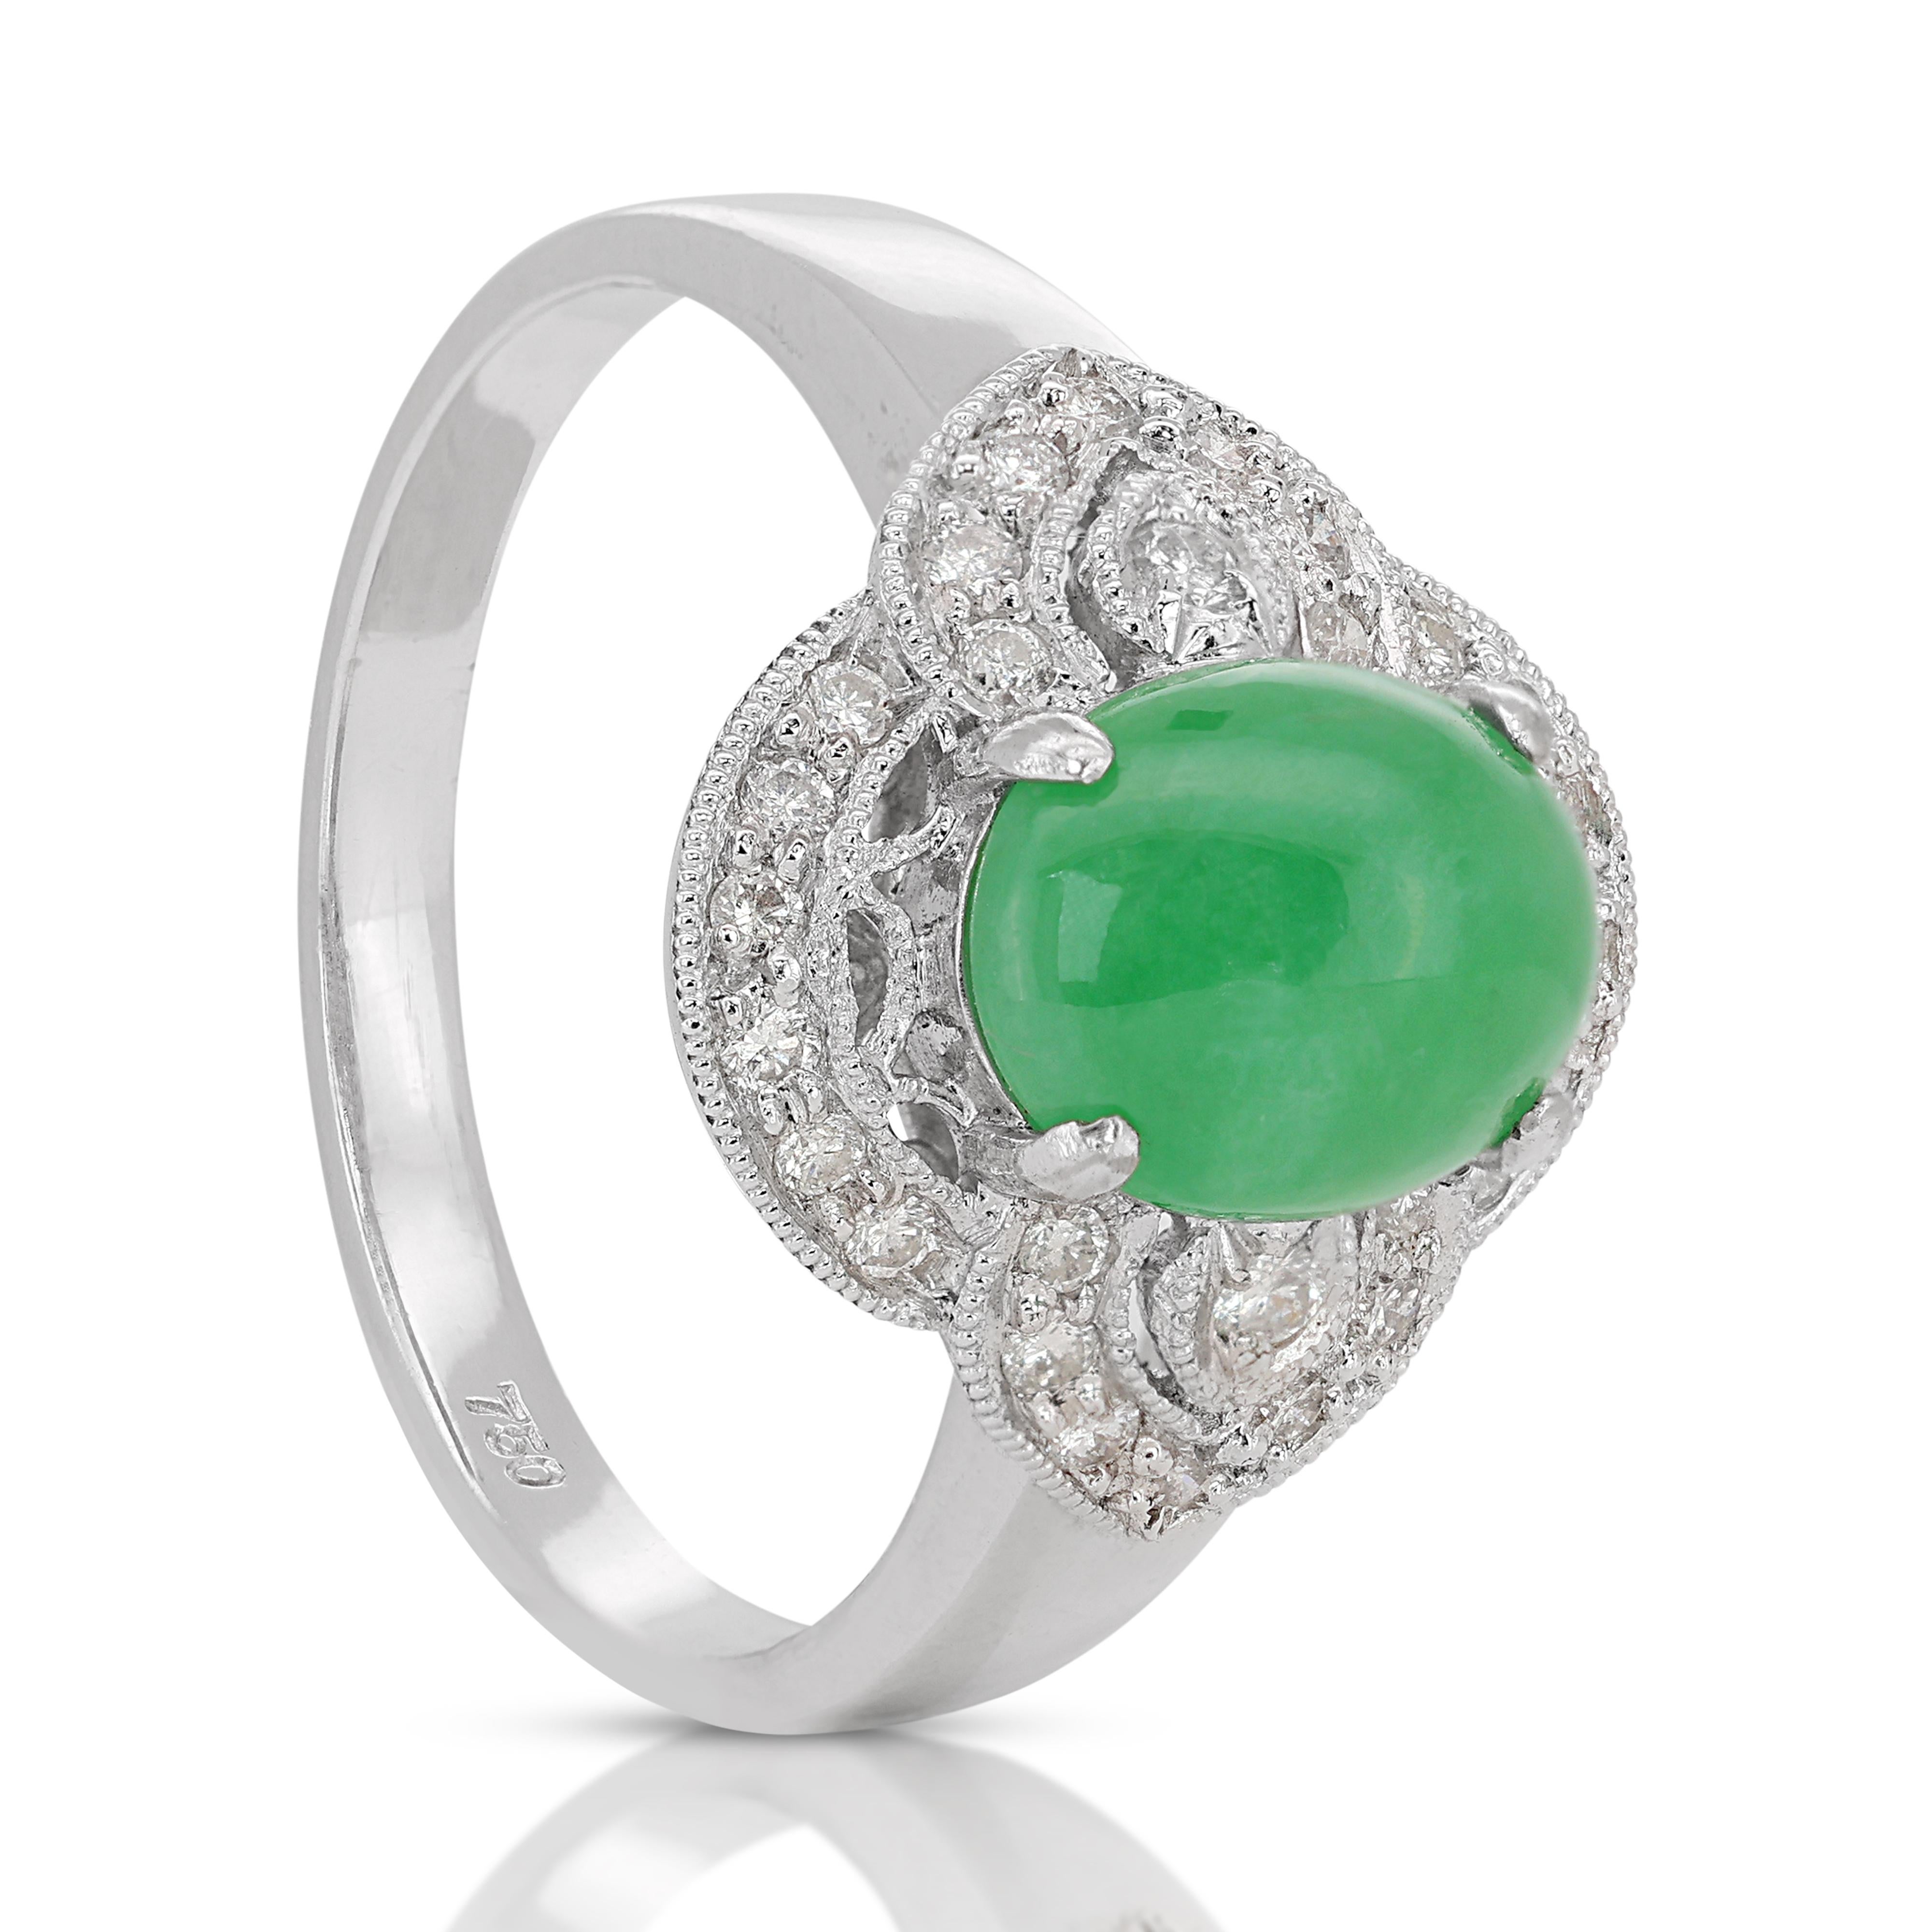 Introducing our stunning 18K White Gold Jade Ring, a true statement of sophistication and elegance. At its center lies a captivating cabochon-cut jade stone, boasting a substantial carat weight of 1.96ct. The rich green hue of the jade exudes a